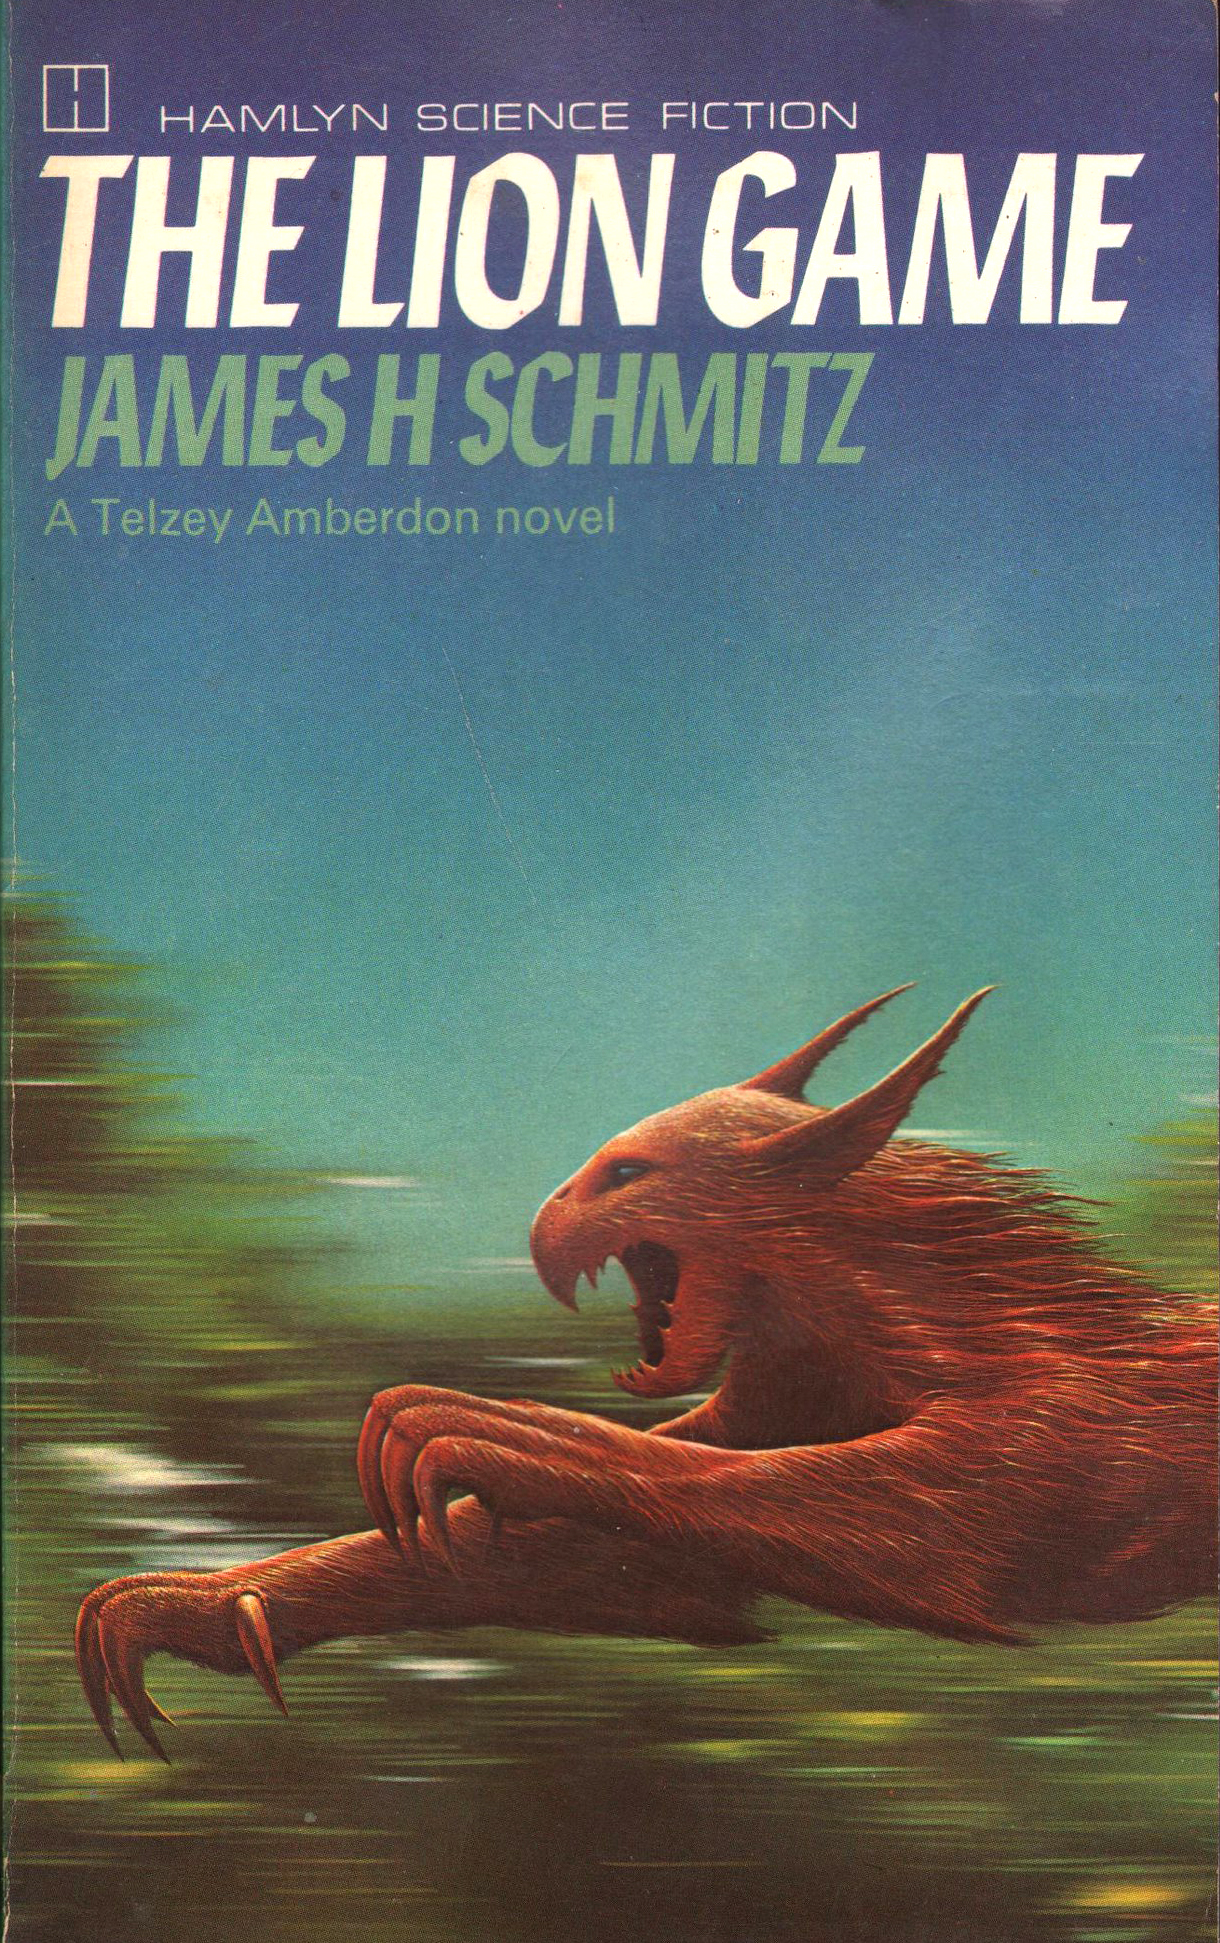 The Lion Game by James H. Schmitz (1979) - art by Tim White